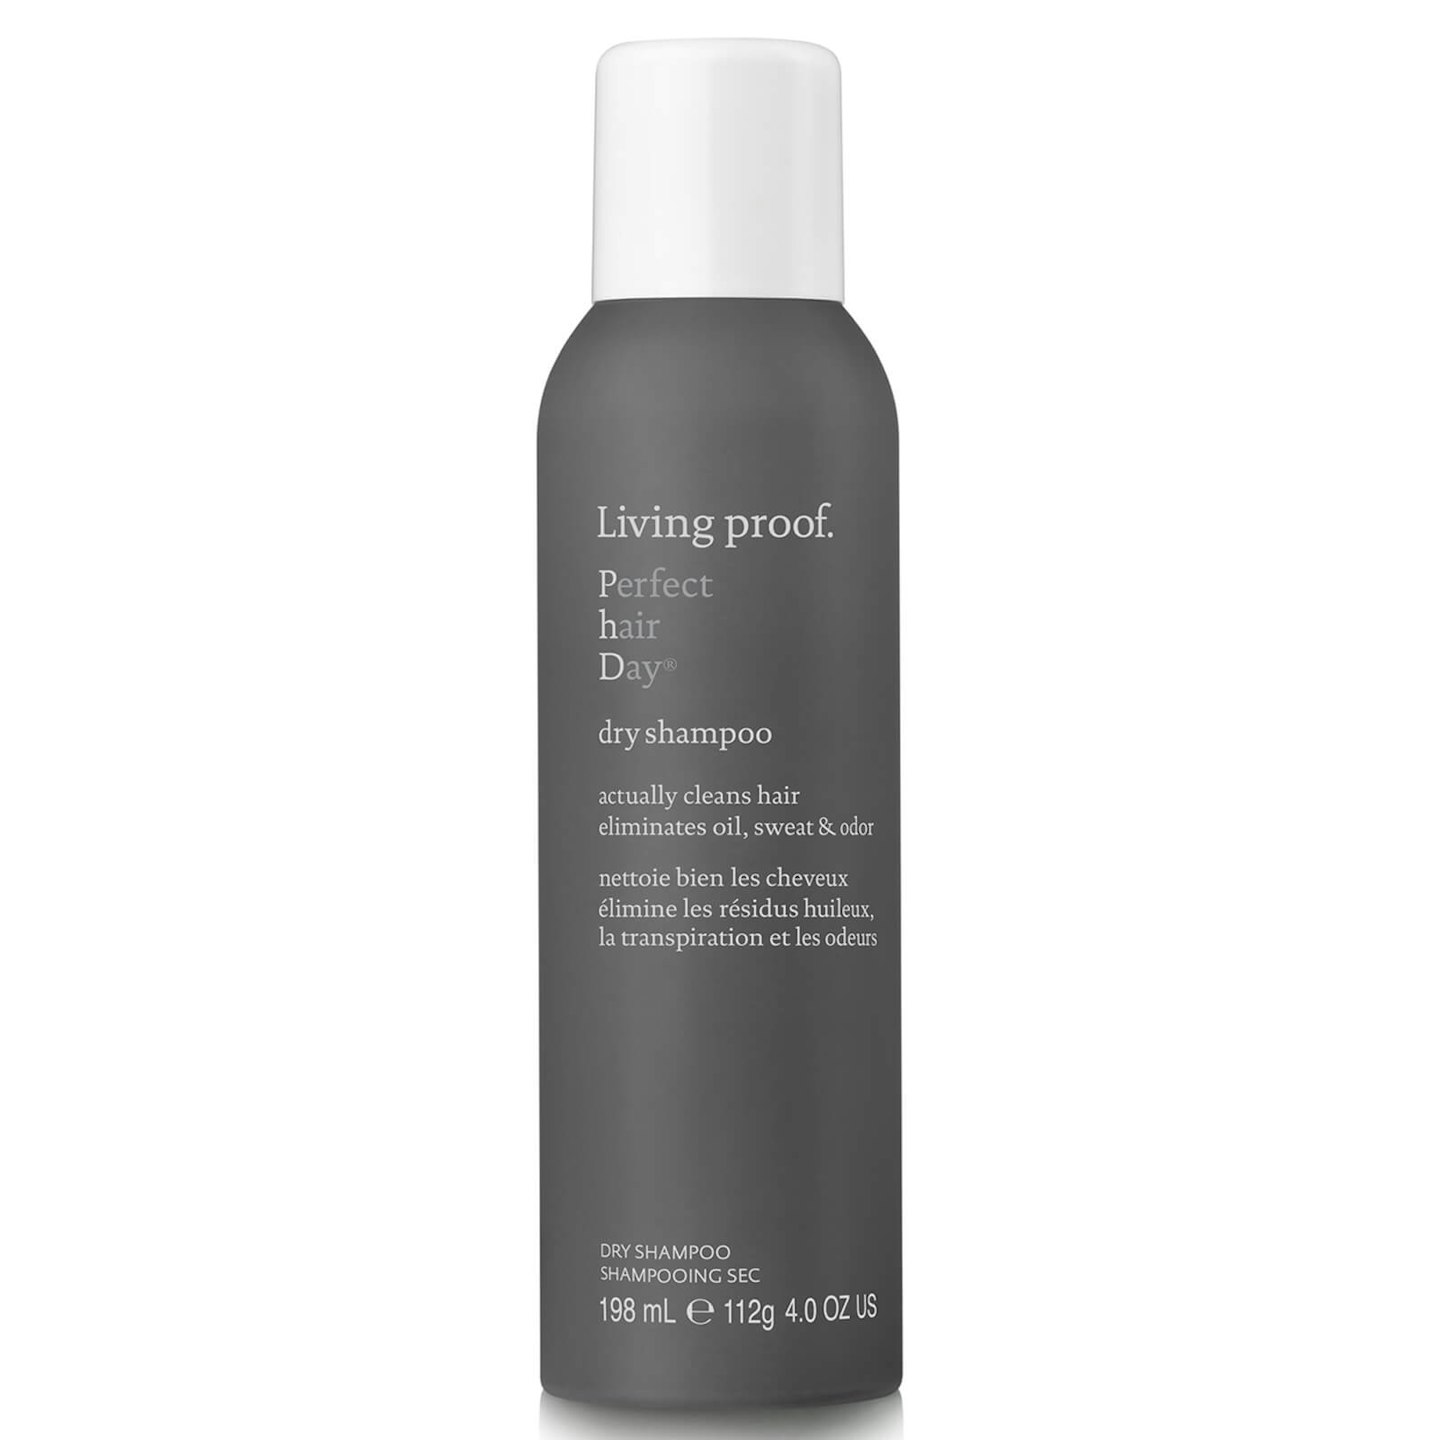 Living Proof Perfect Hair Day Dry Shampoo, £18